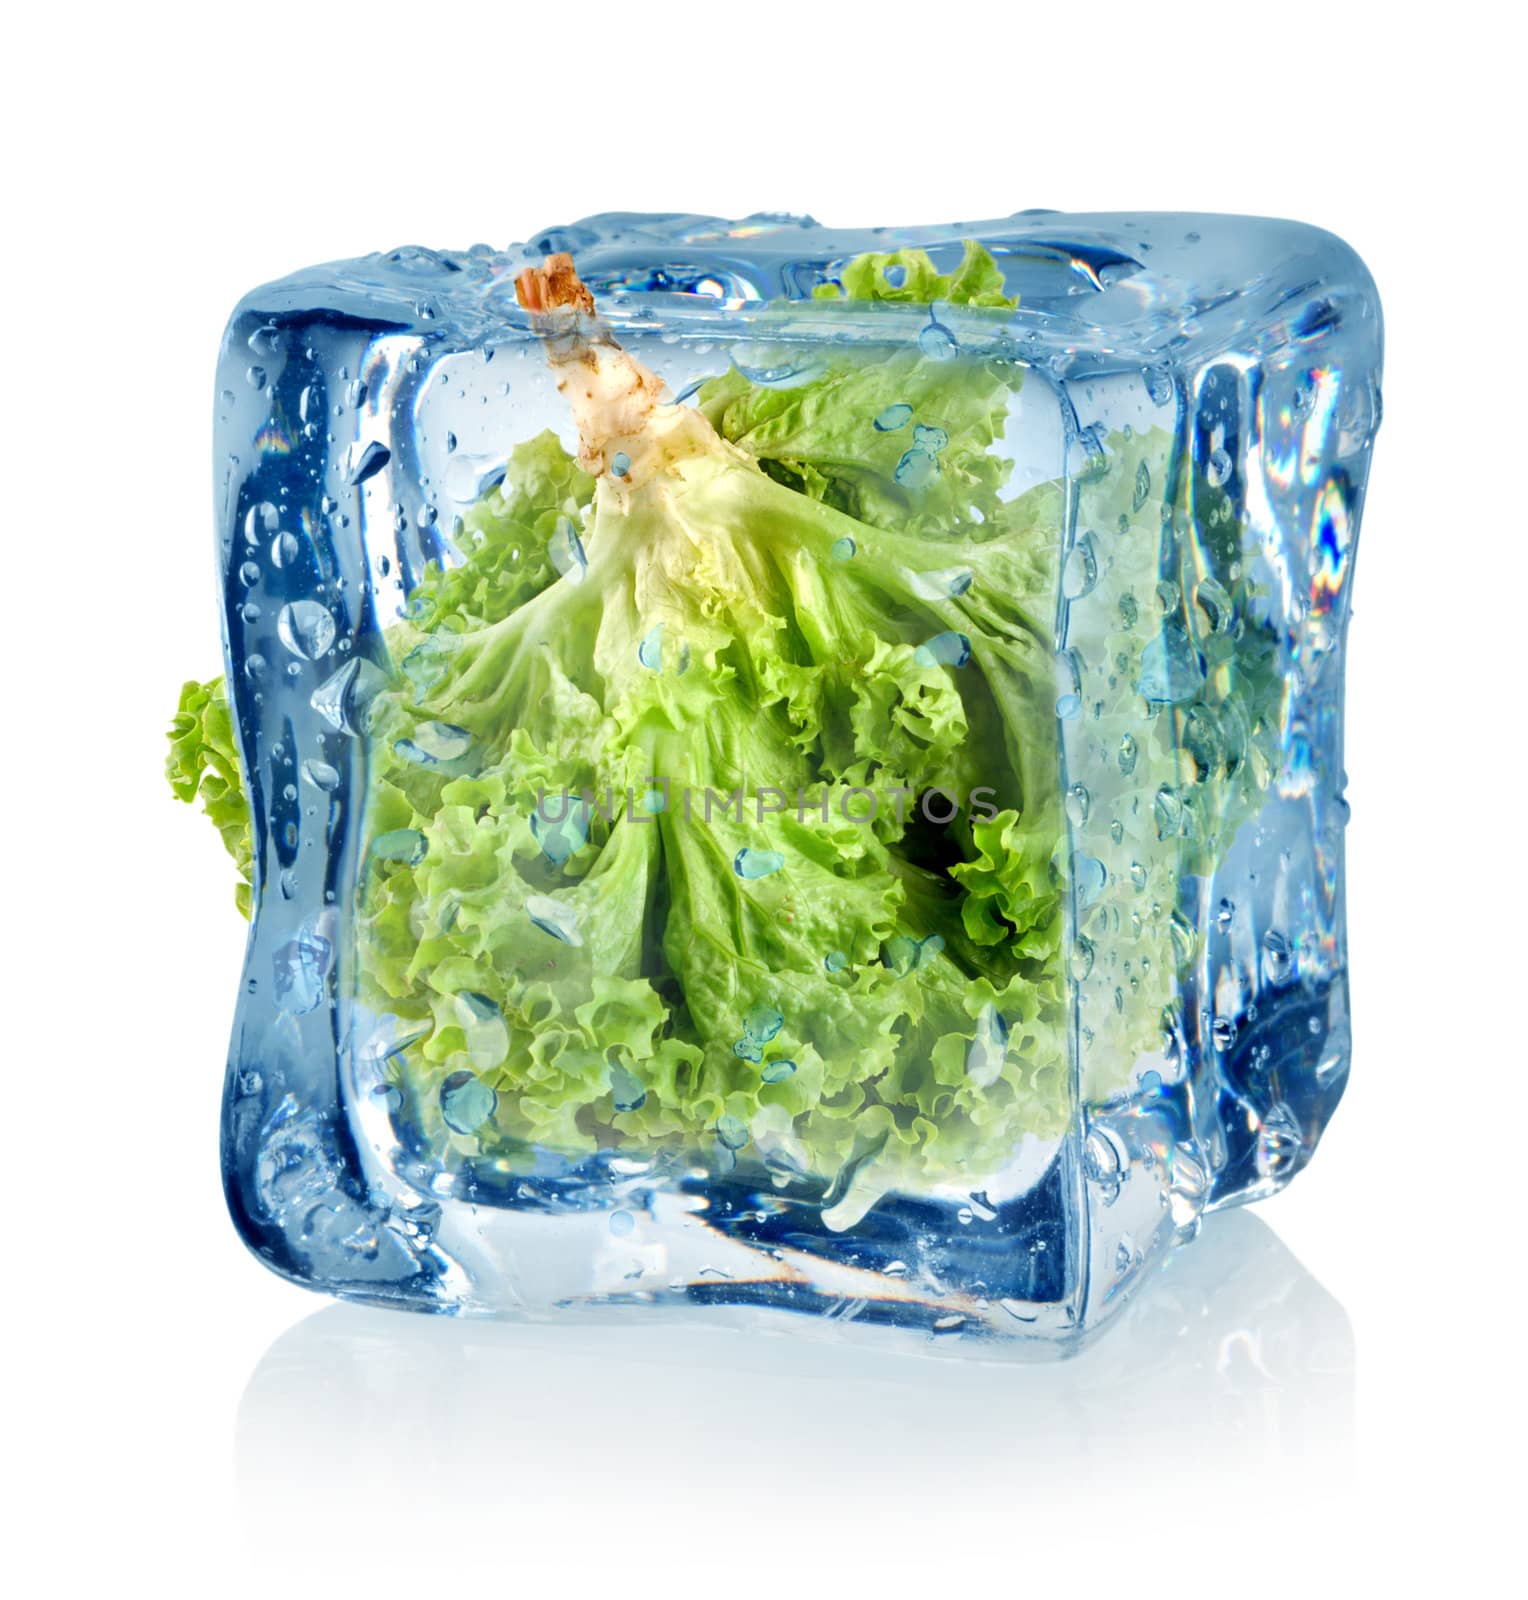 Ice cube and lettuce isolated on a white background